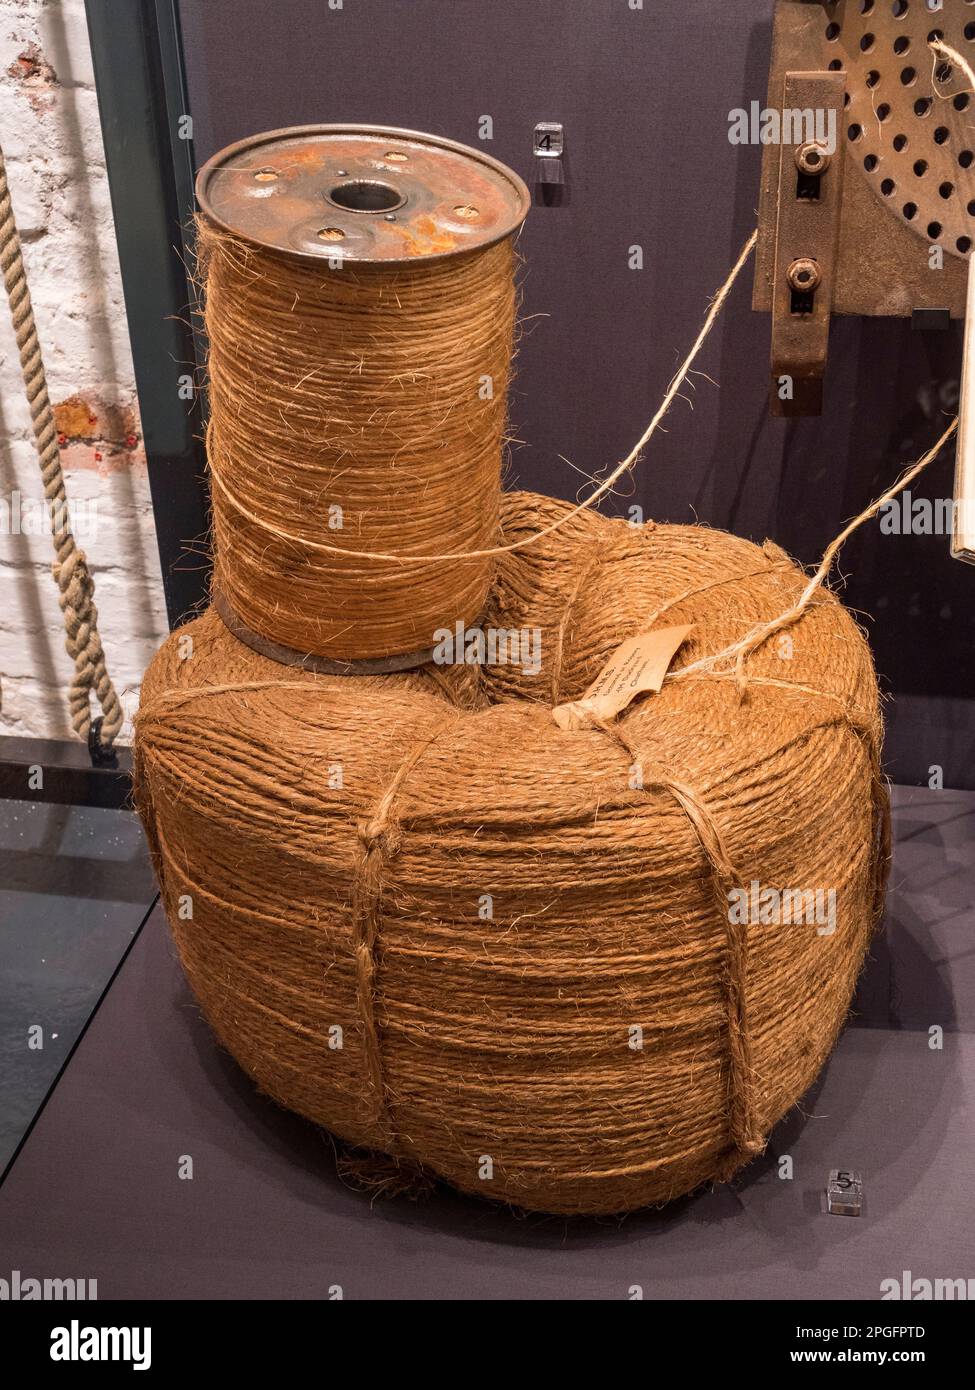 Coil of Chatham Spunyarn (1960s) on display in the Ropery Gallery, Historic Dockyard Chatham, Kent, UK. Stock Photo